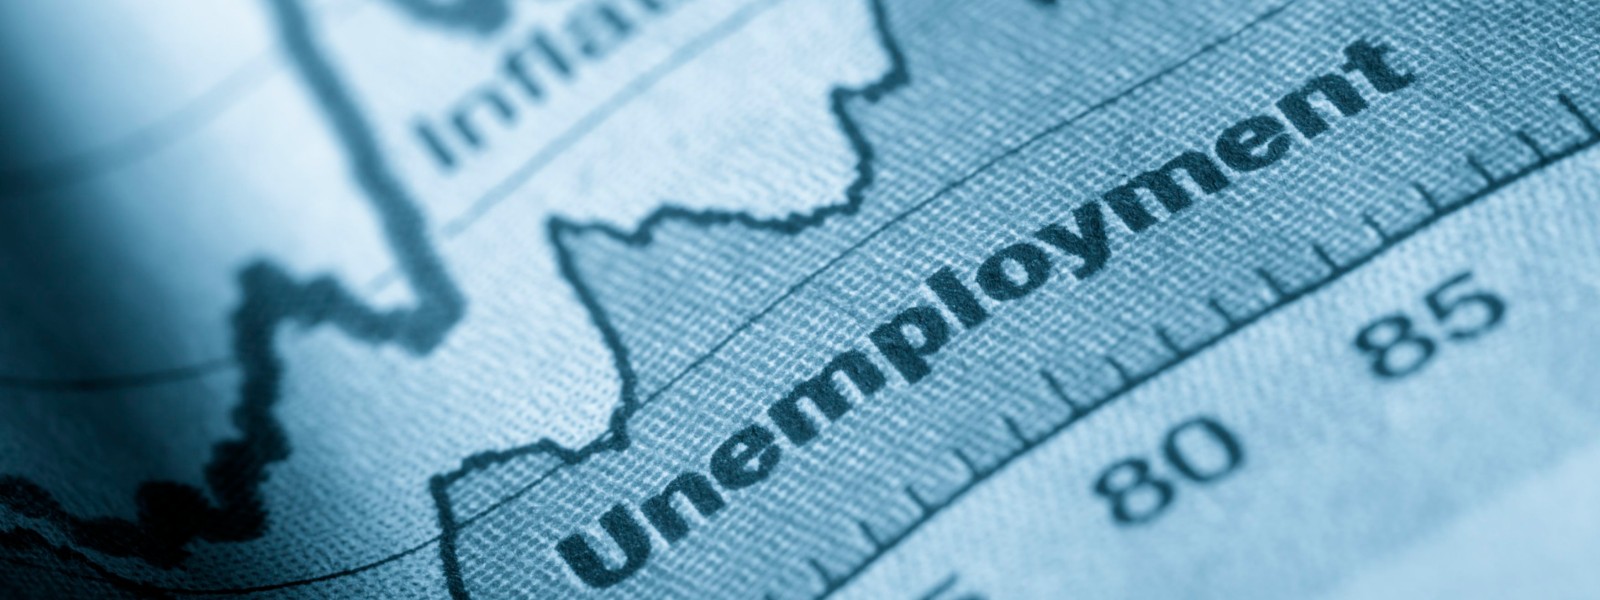 Labor Ministry conducts study on unemployment during crisis